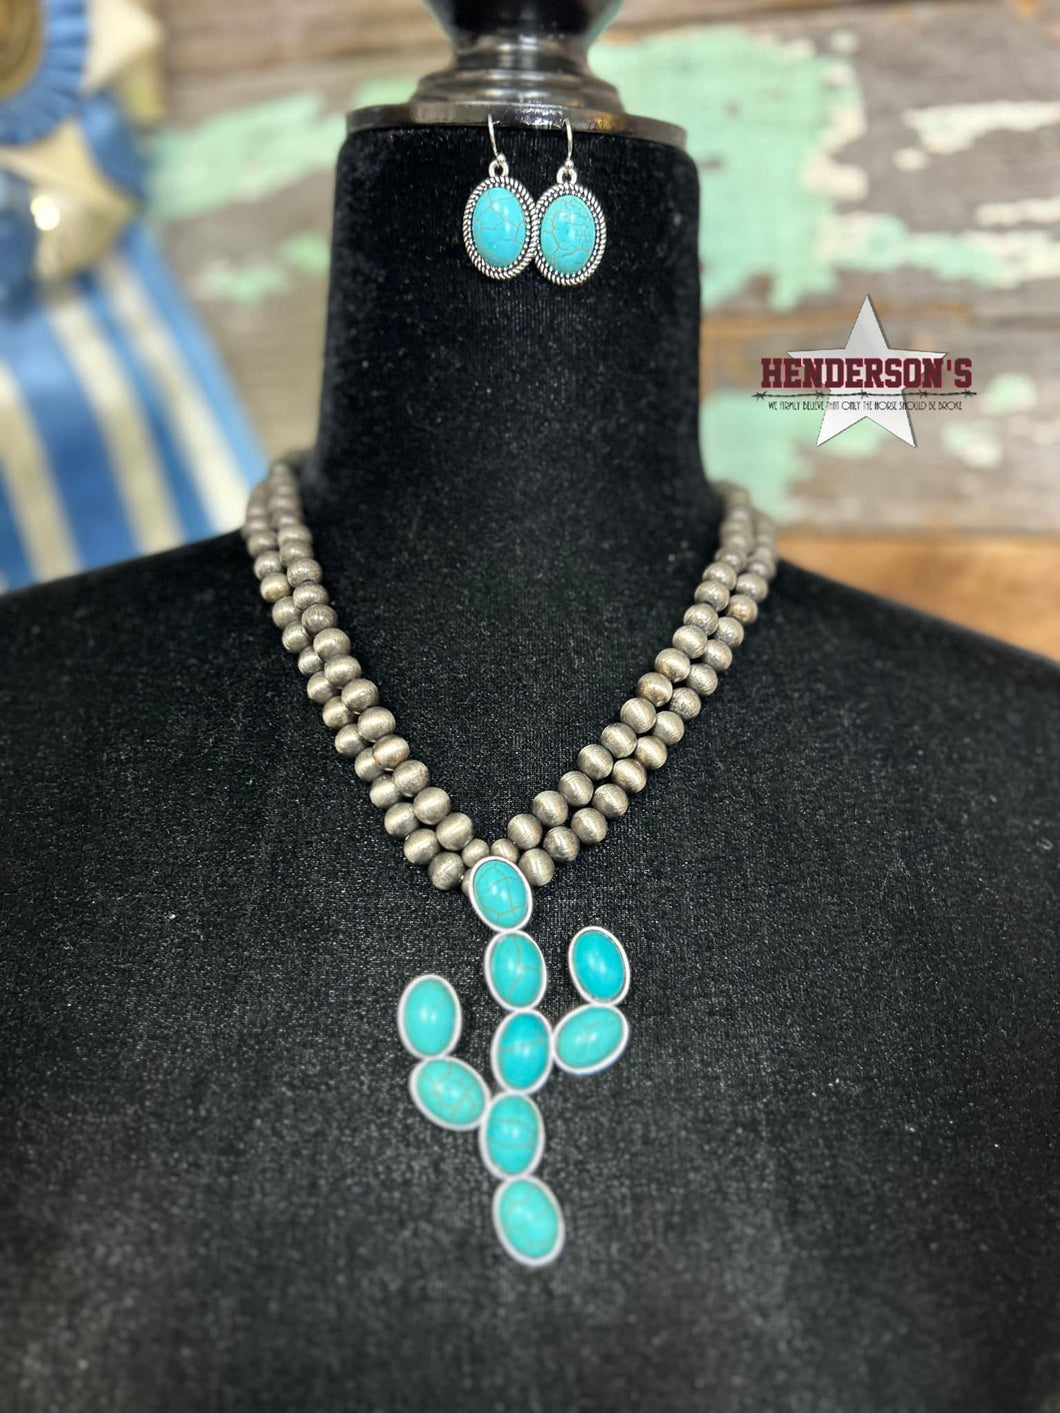 Navajo Layered Bead Cactus Necklace - Henderson's Western Store